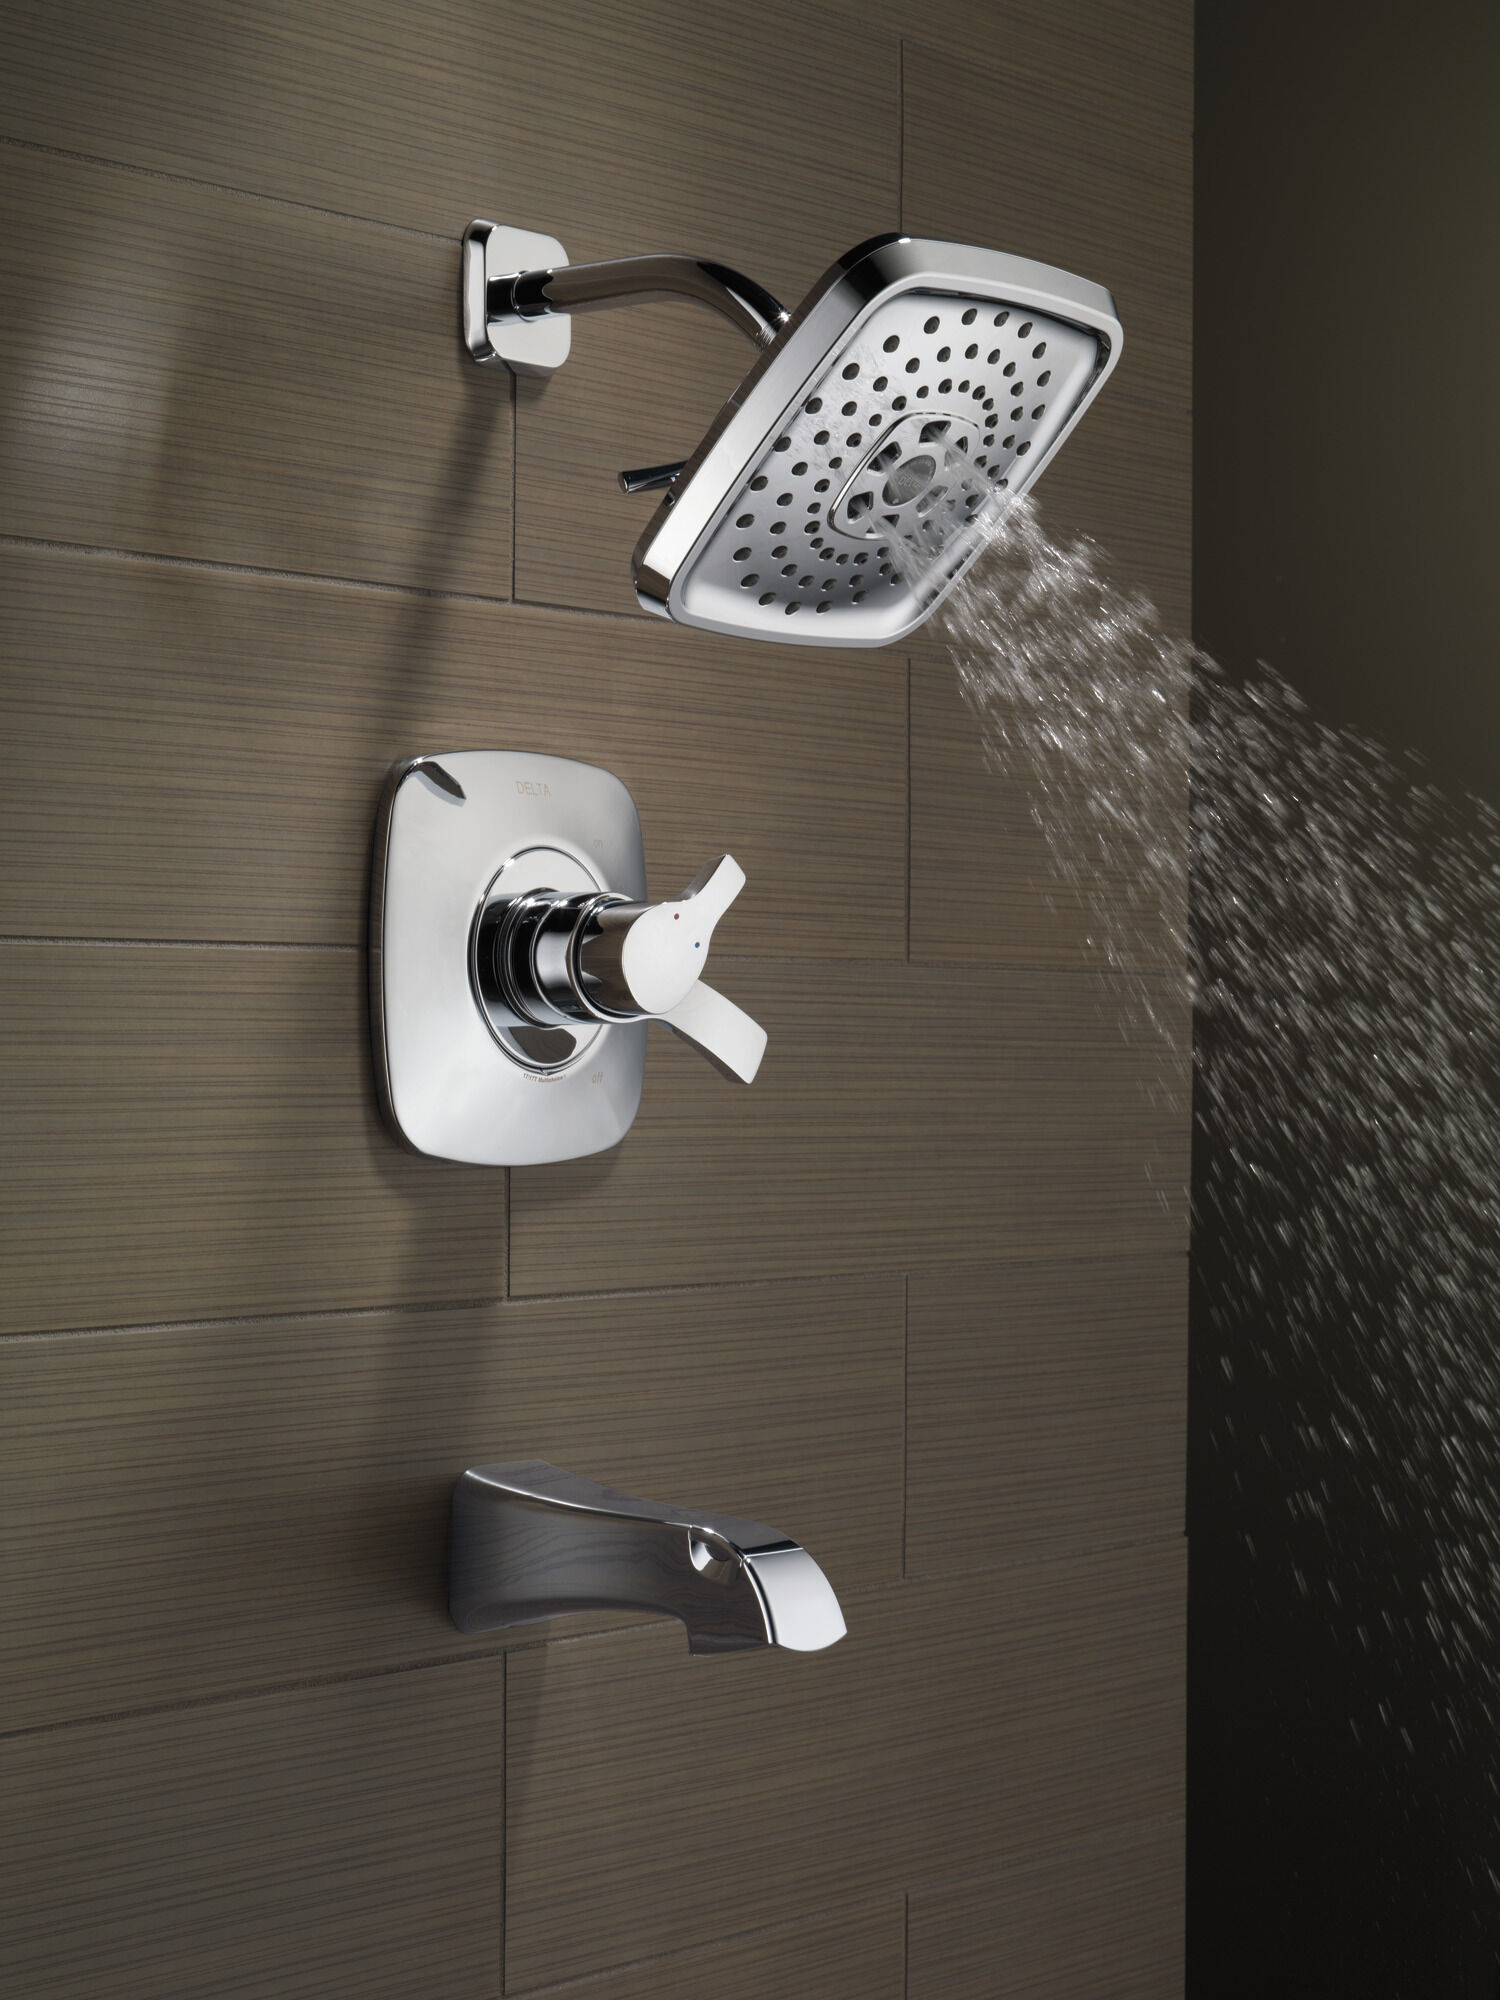 Delta Faucet Tesla 17 Series Dual-Function Tub and Shower Trim Kit with Three-Spray Touch-Clean H2Okinetic Shower Head Stainless T17452-SS Valve Not Included